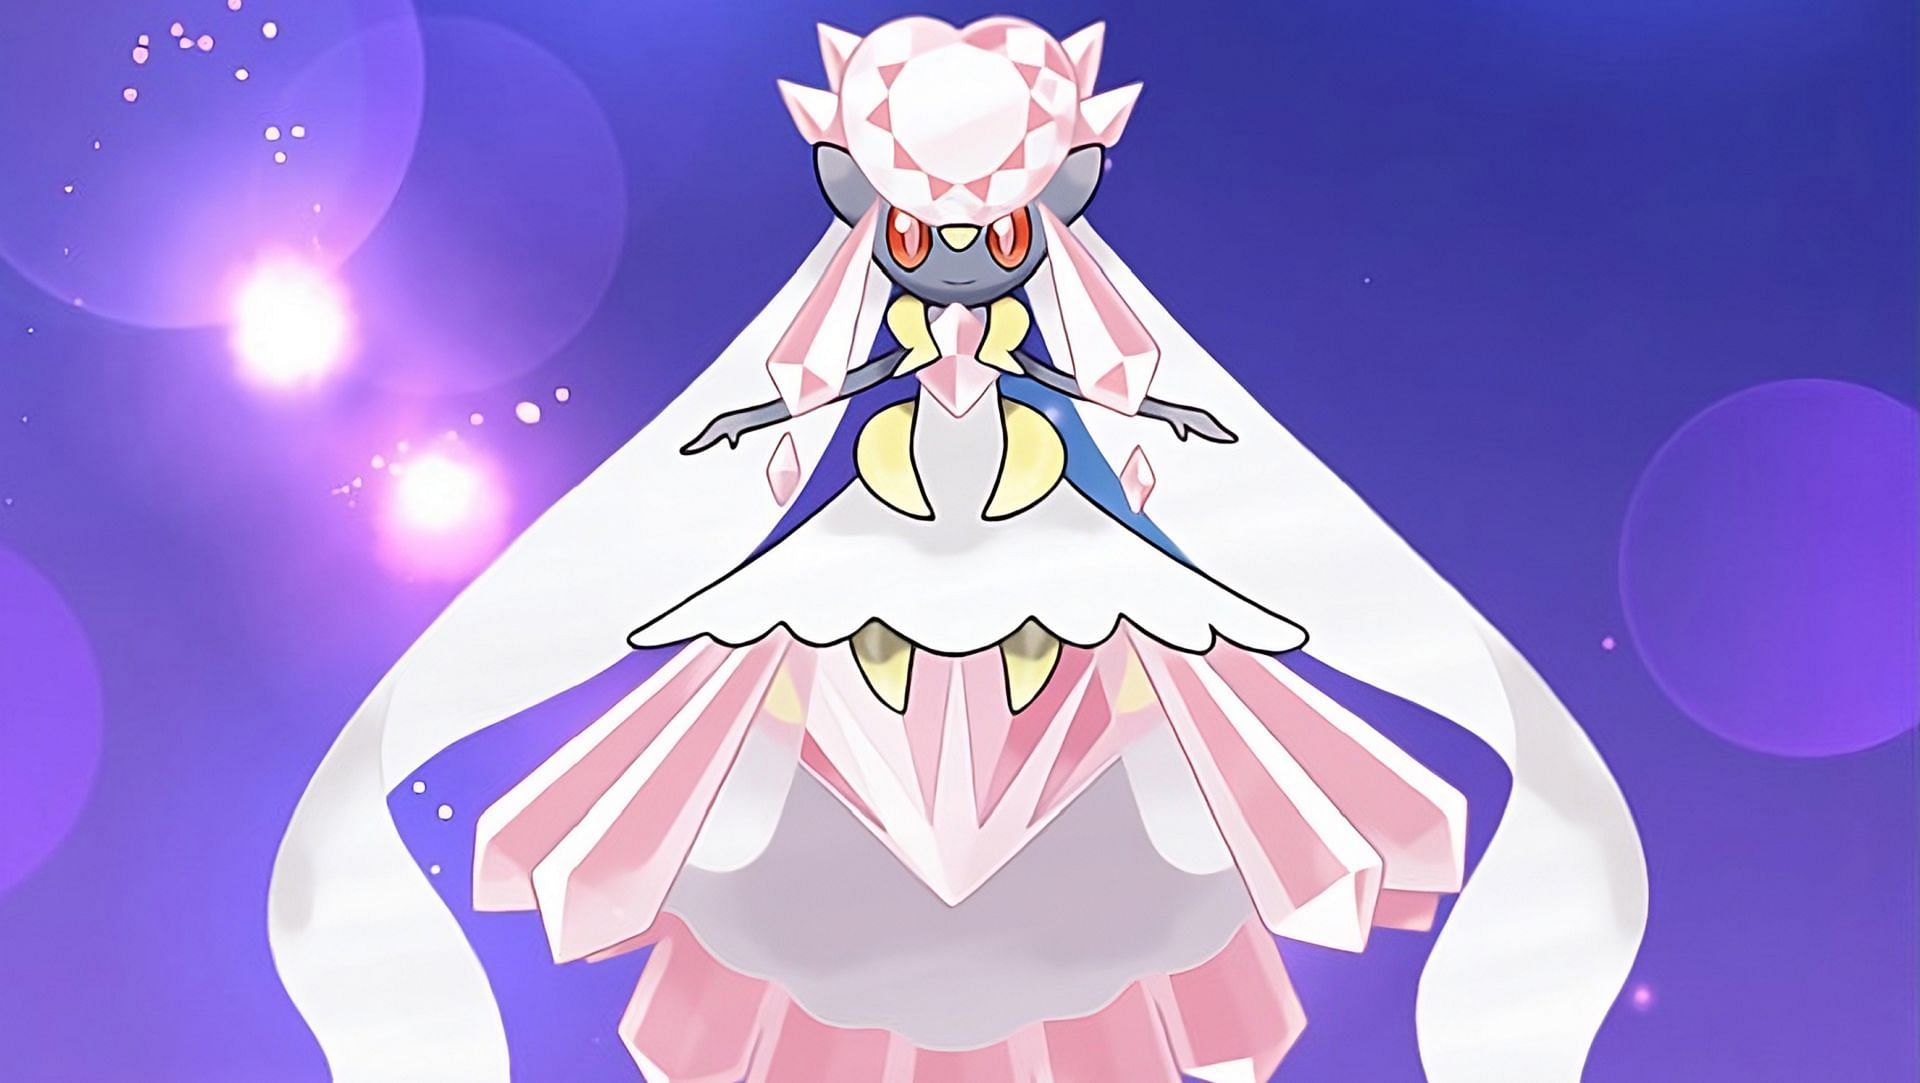 Mega Diancie is a Rock/Fairy-type Mythical Pokemon originating from Generation VI.